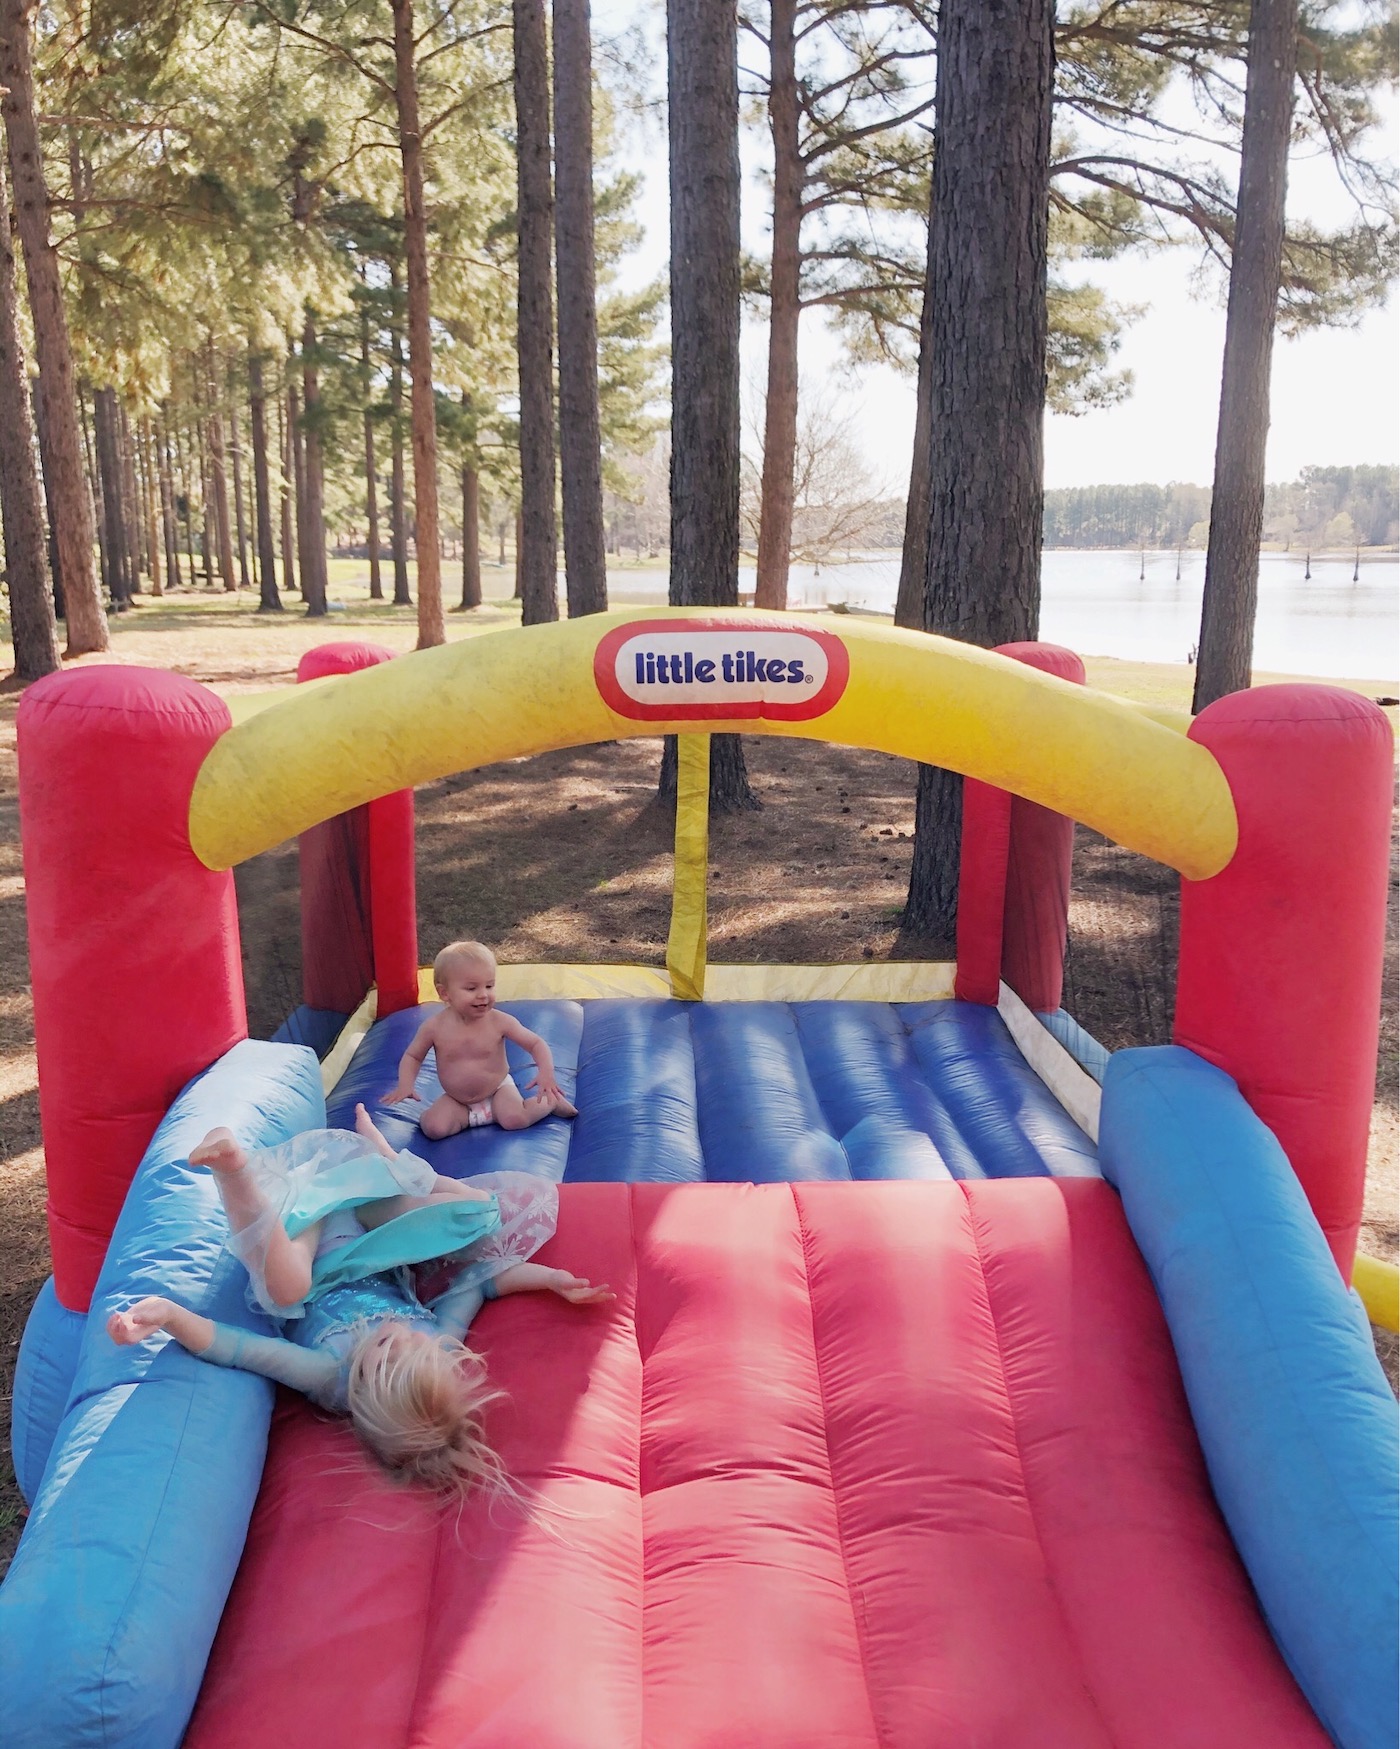 Roundup of bouncy houses that are all $200 or UNDER! // www.thehiveblog.com